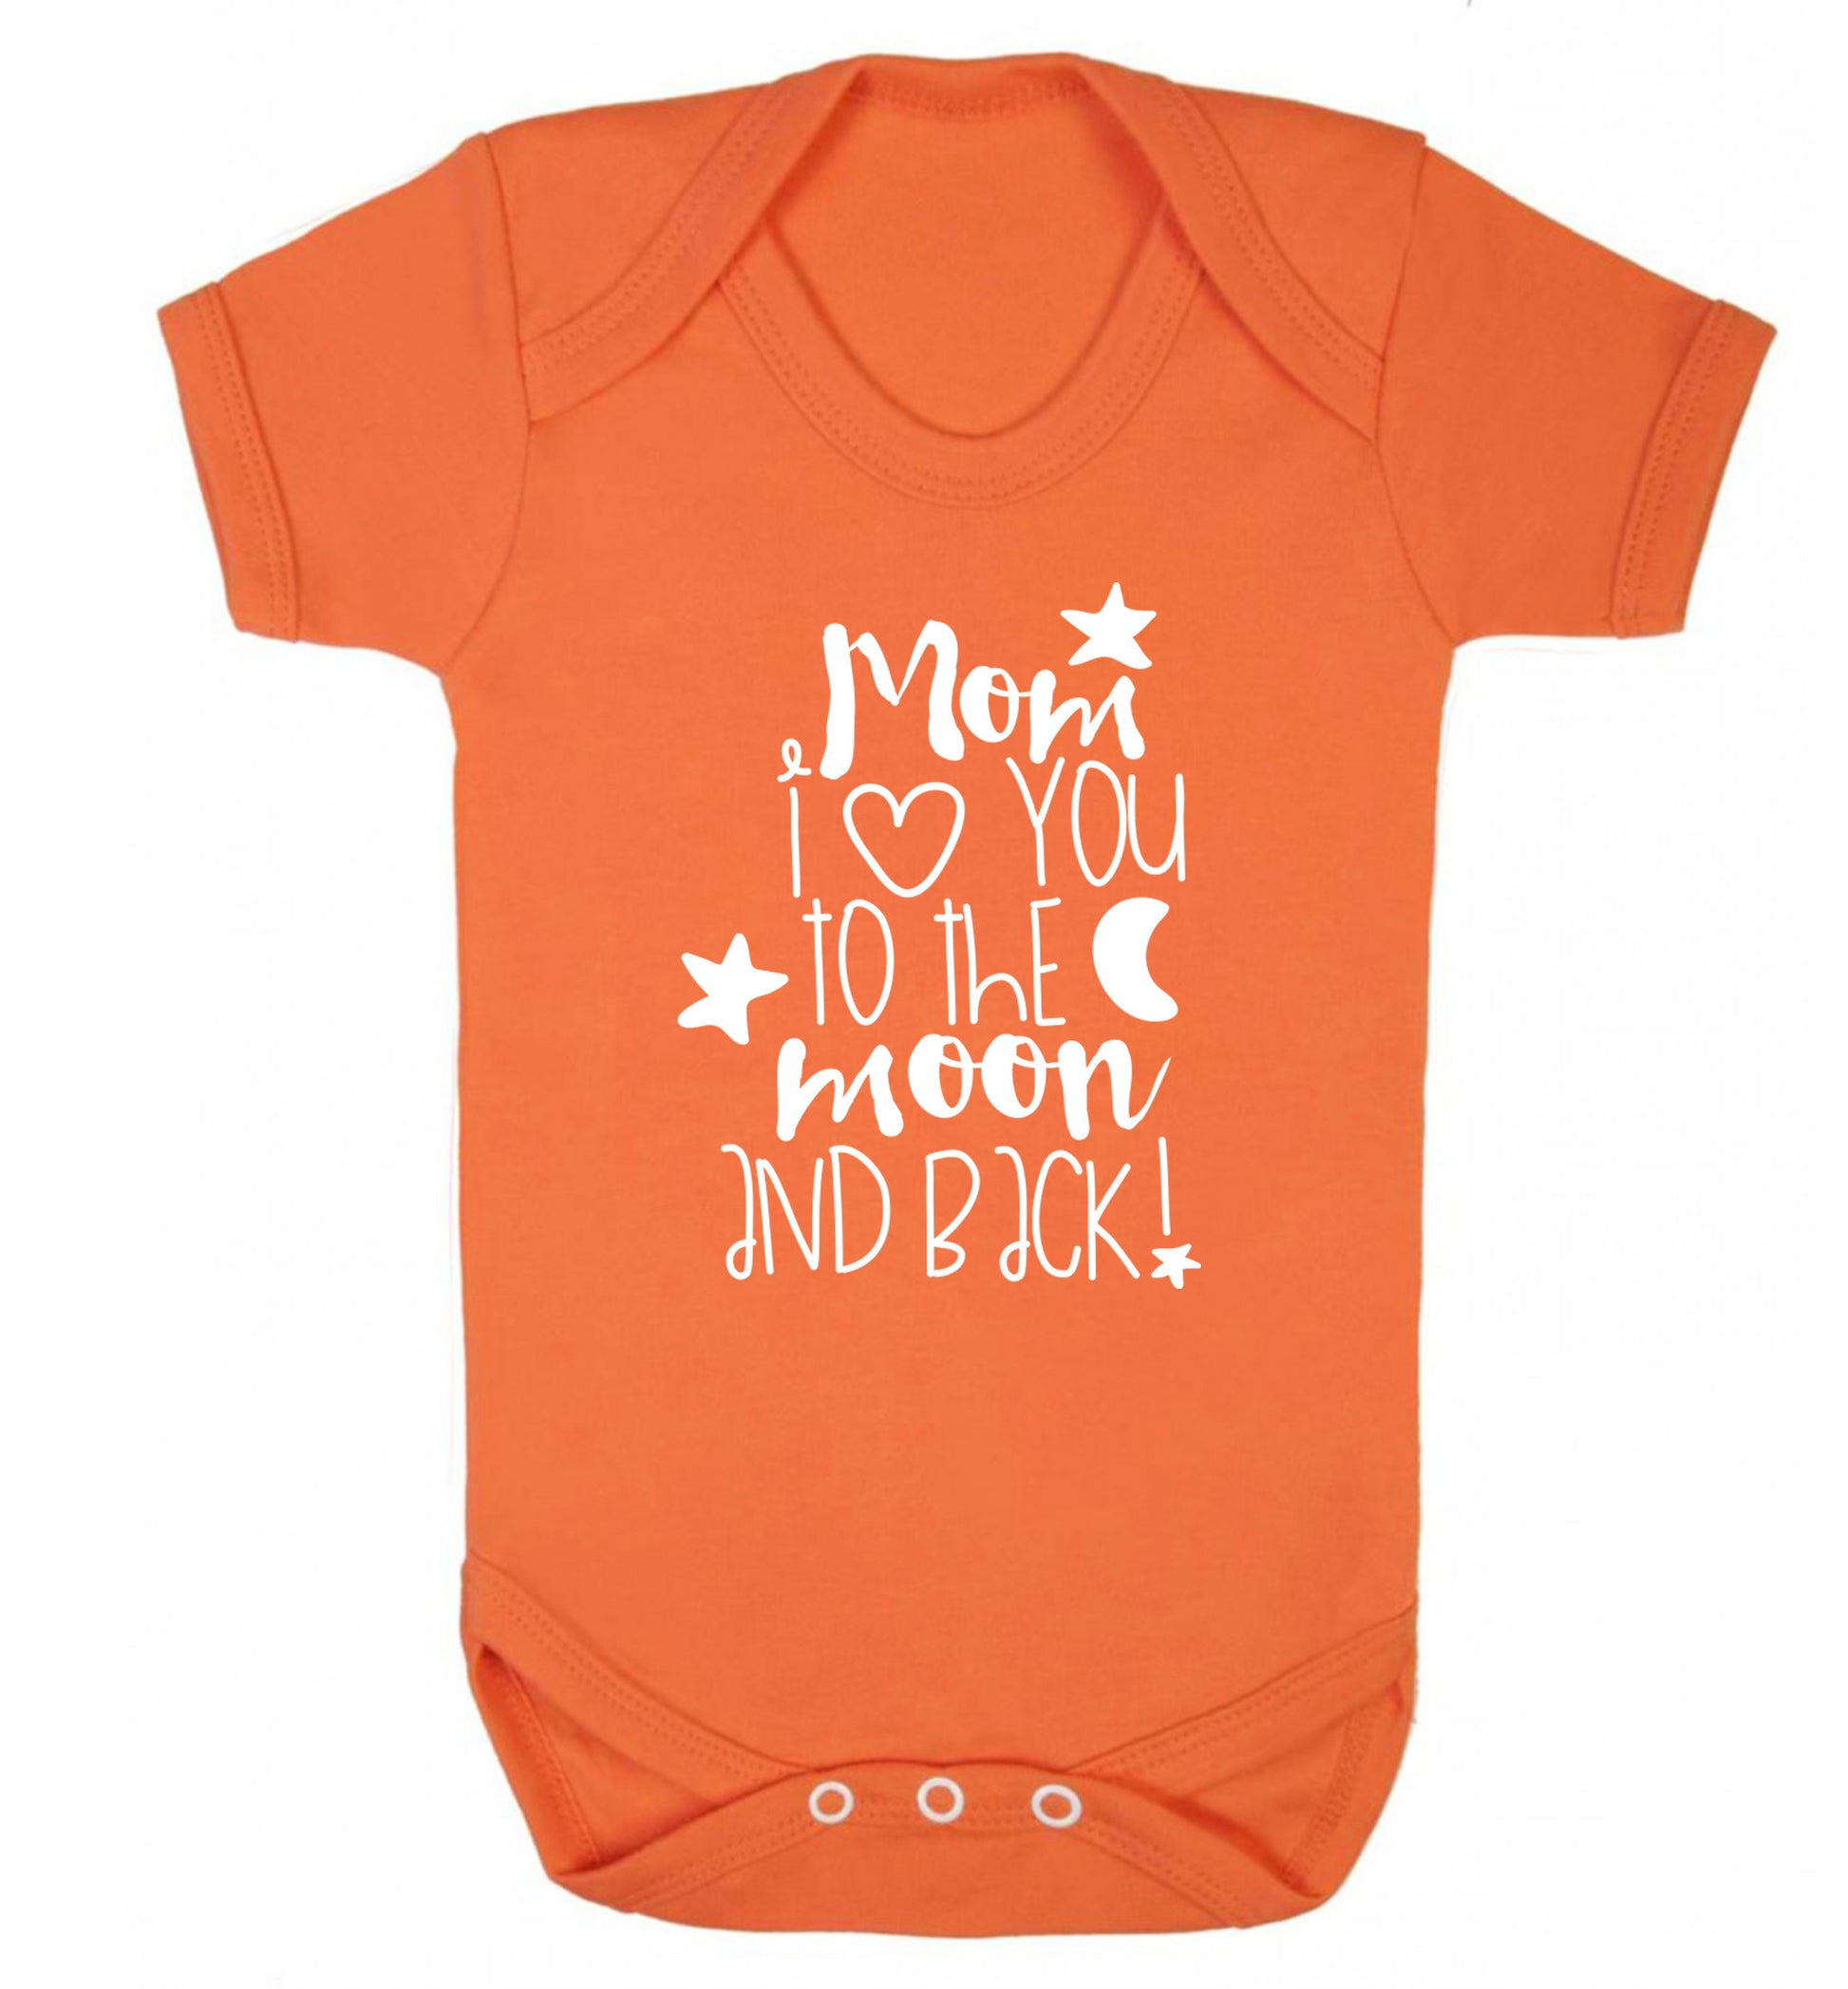 Dad I love you to the moon and back Baby Vest orange 18-24 months